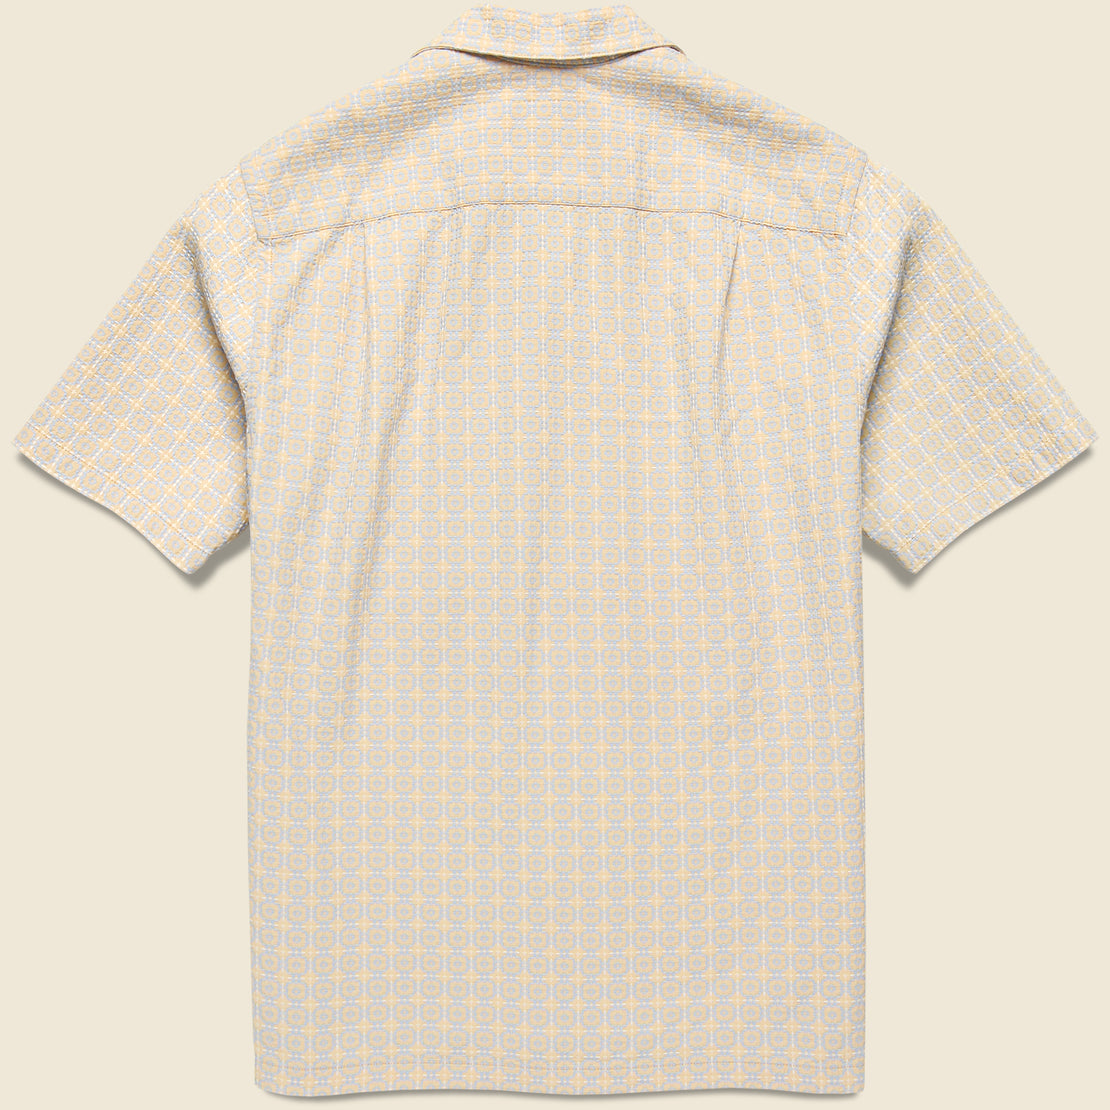 Tile Camp Shirt - Beige - Portuguese Flannel - STAG Provisions - Tops - S/S Woven - Other Pattern